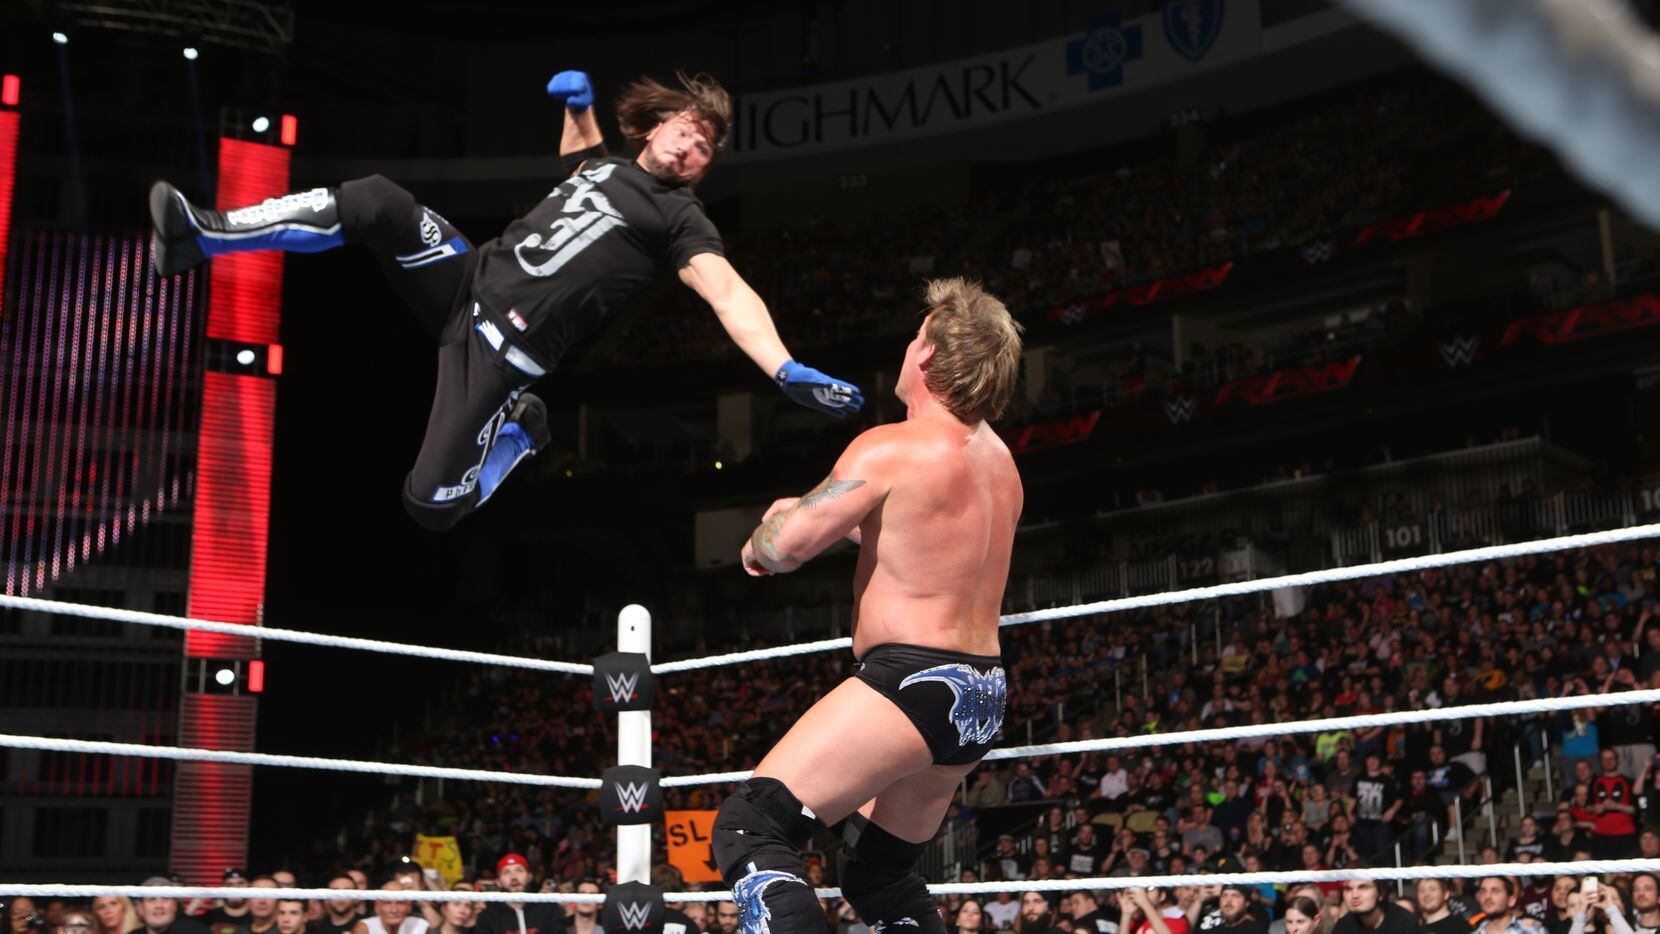 AJ Styles prepares to hit Chris Jericho with a flying forearm on an epsiode of Monday Night...